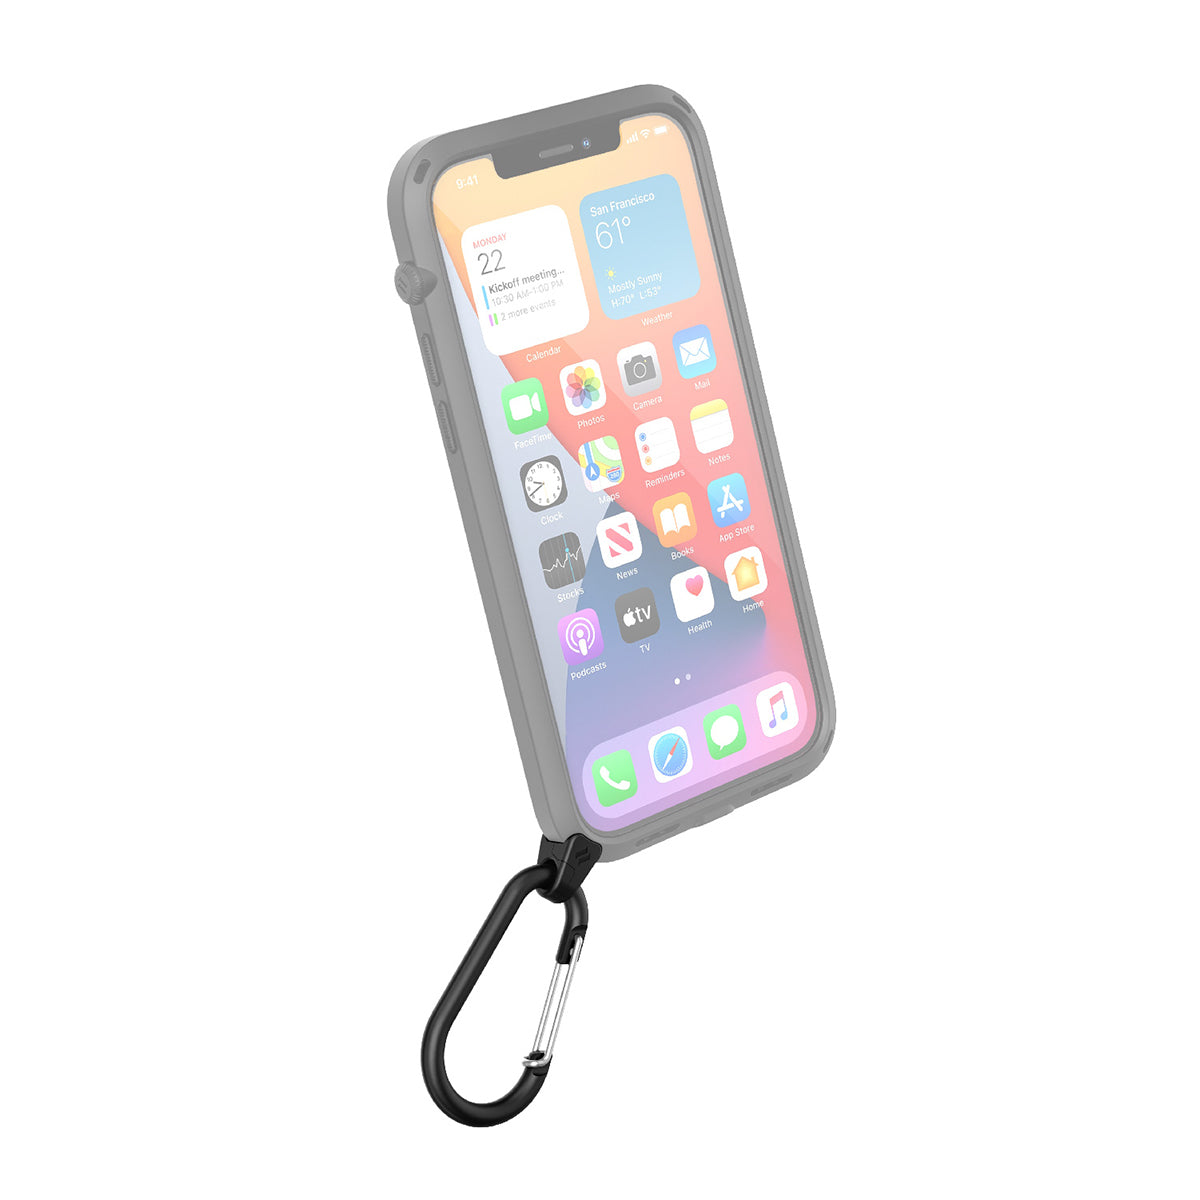 Catalyst carabiner attachment attached on iPhone